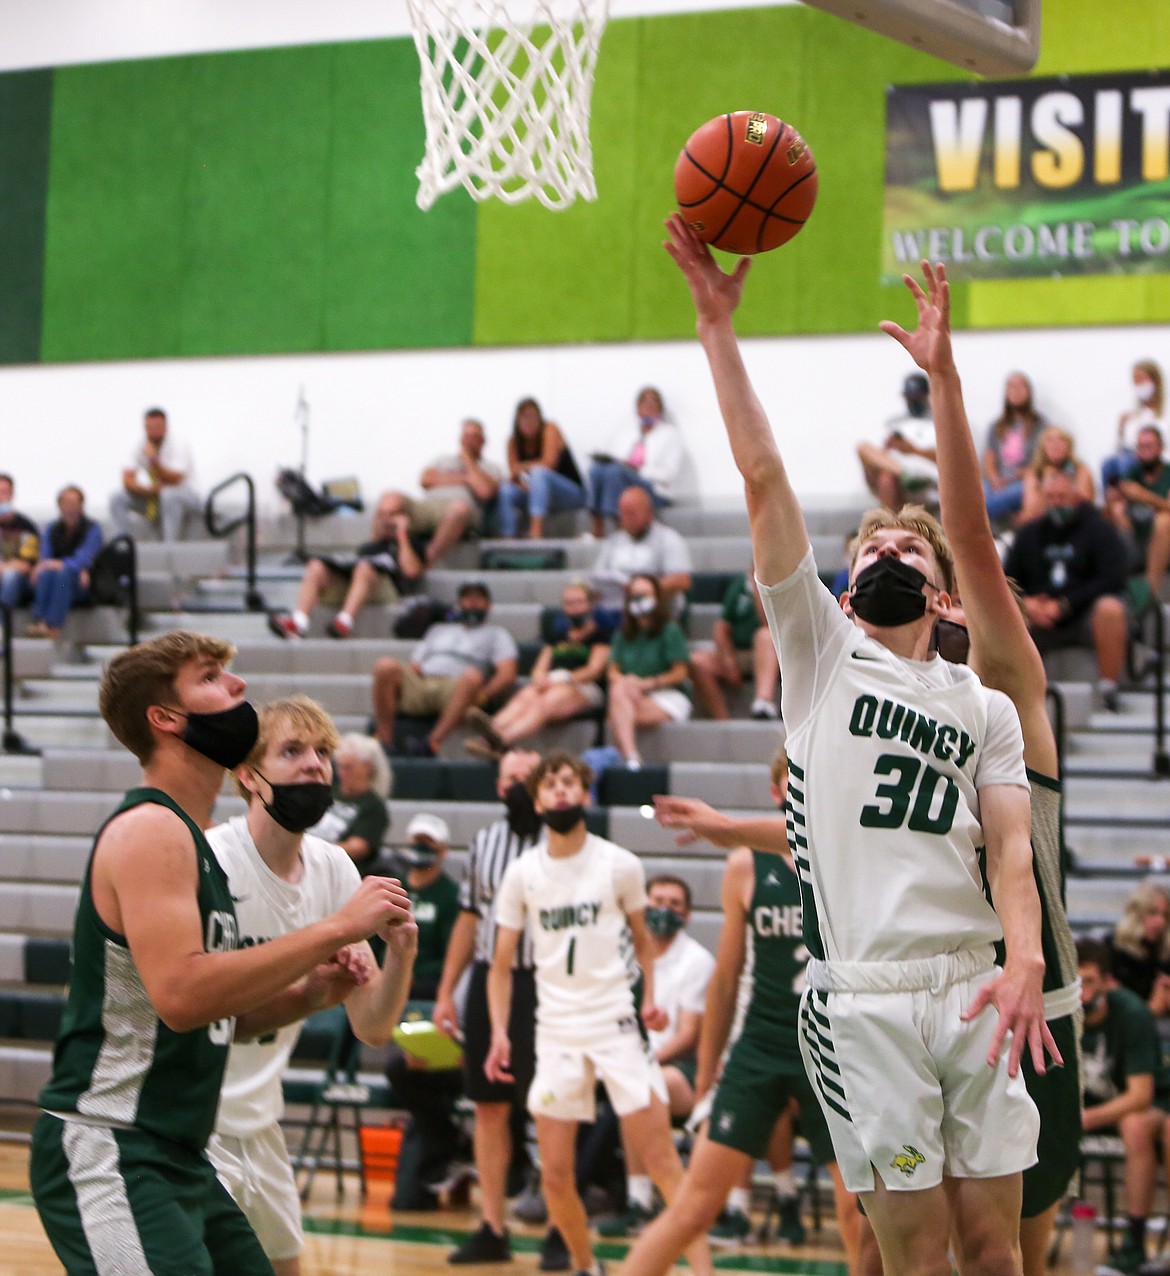 Aidan Heikes goes up for a shot for Quincy High School on Friday night in the 87-53 defeat to Chelan High School at home.